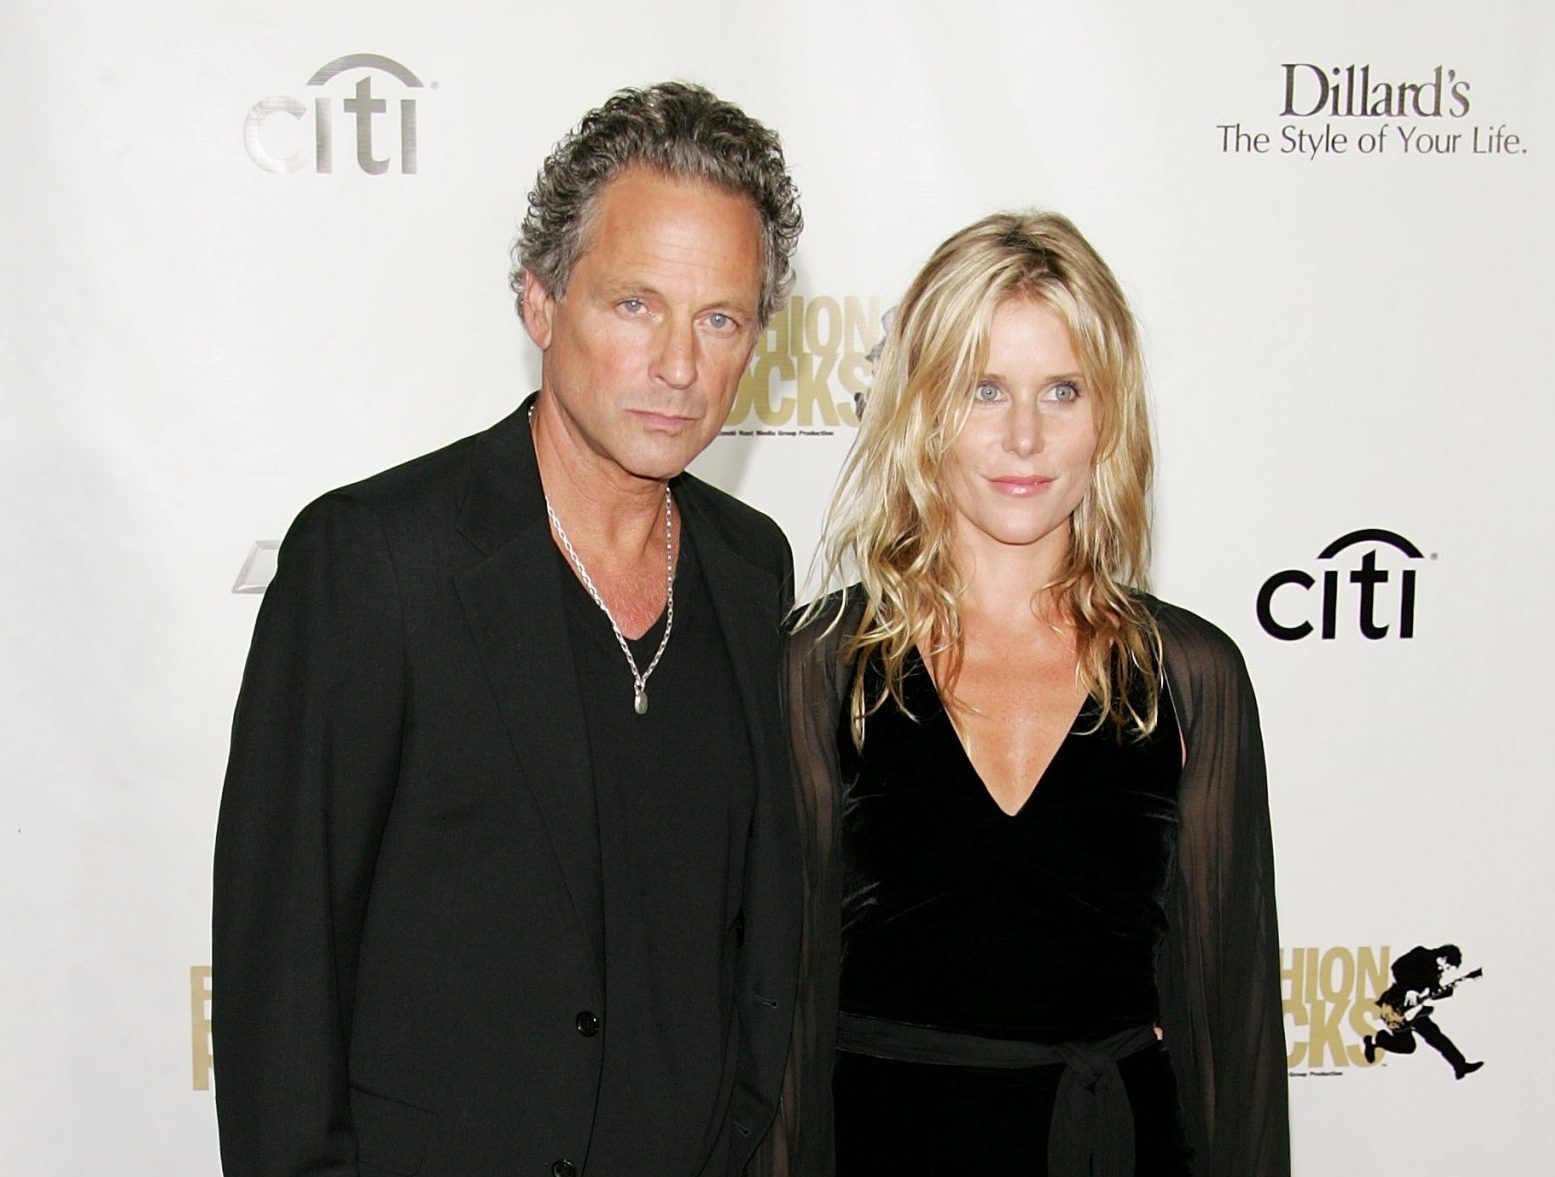 Lindsey Buckingham Splits with Wife After 21 Years of Marriage